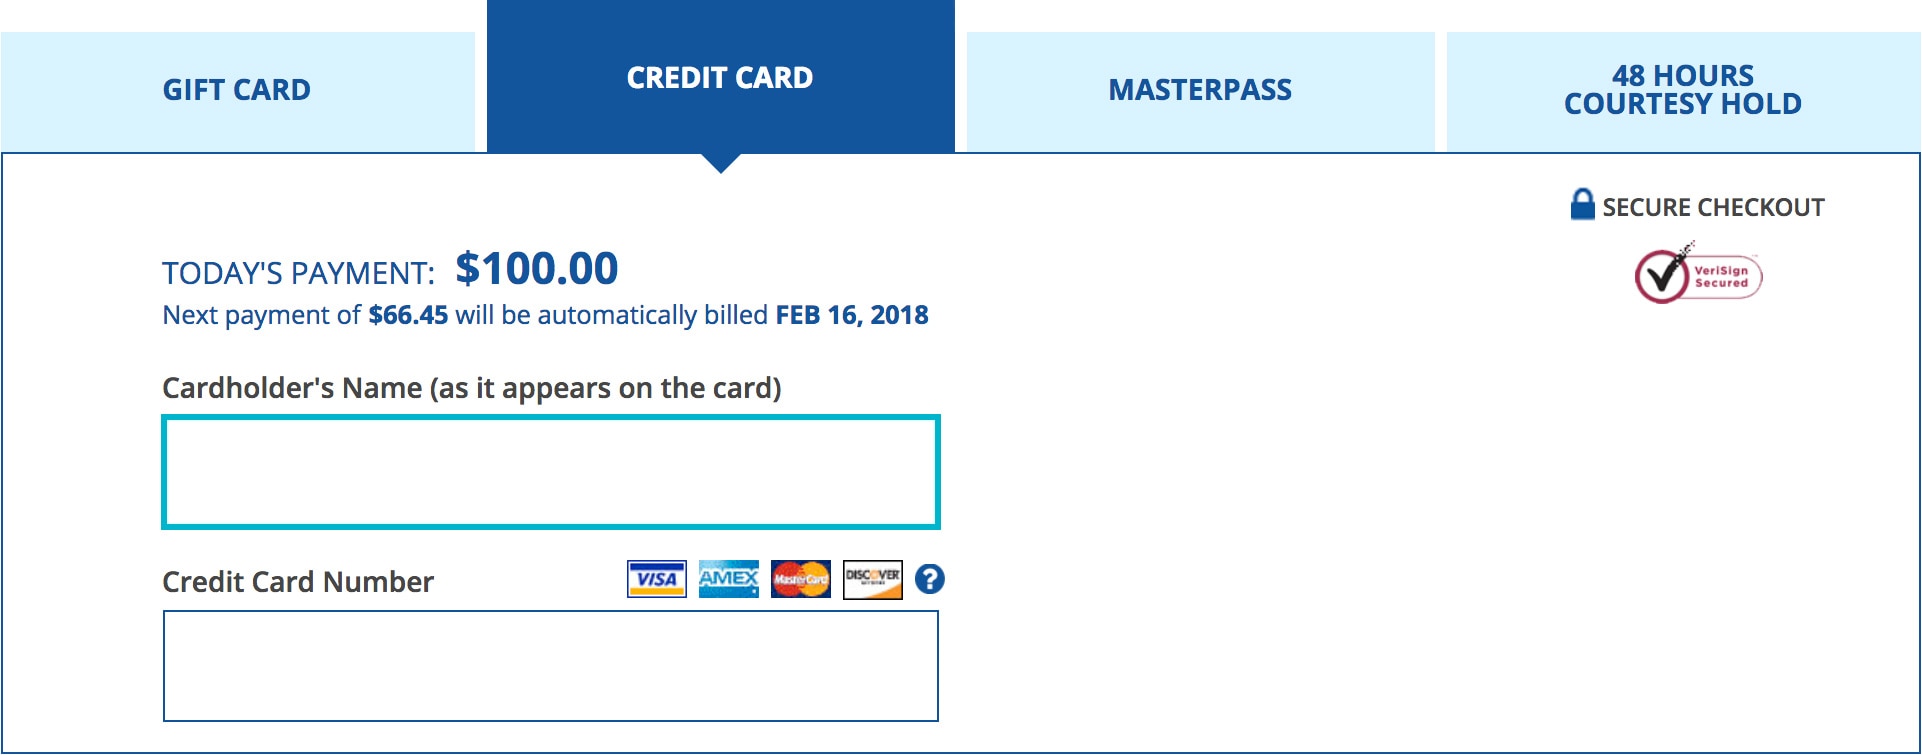 screen shot of credit card entry fields